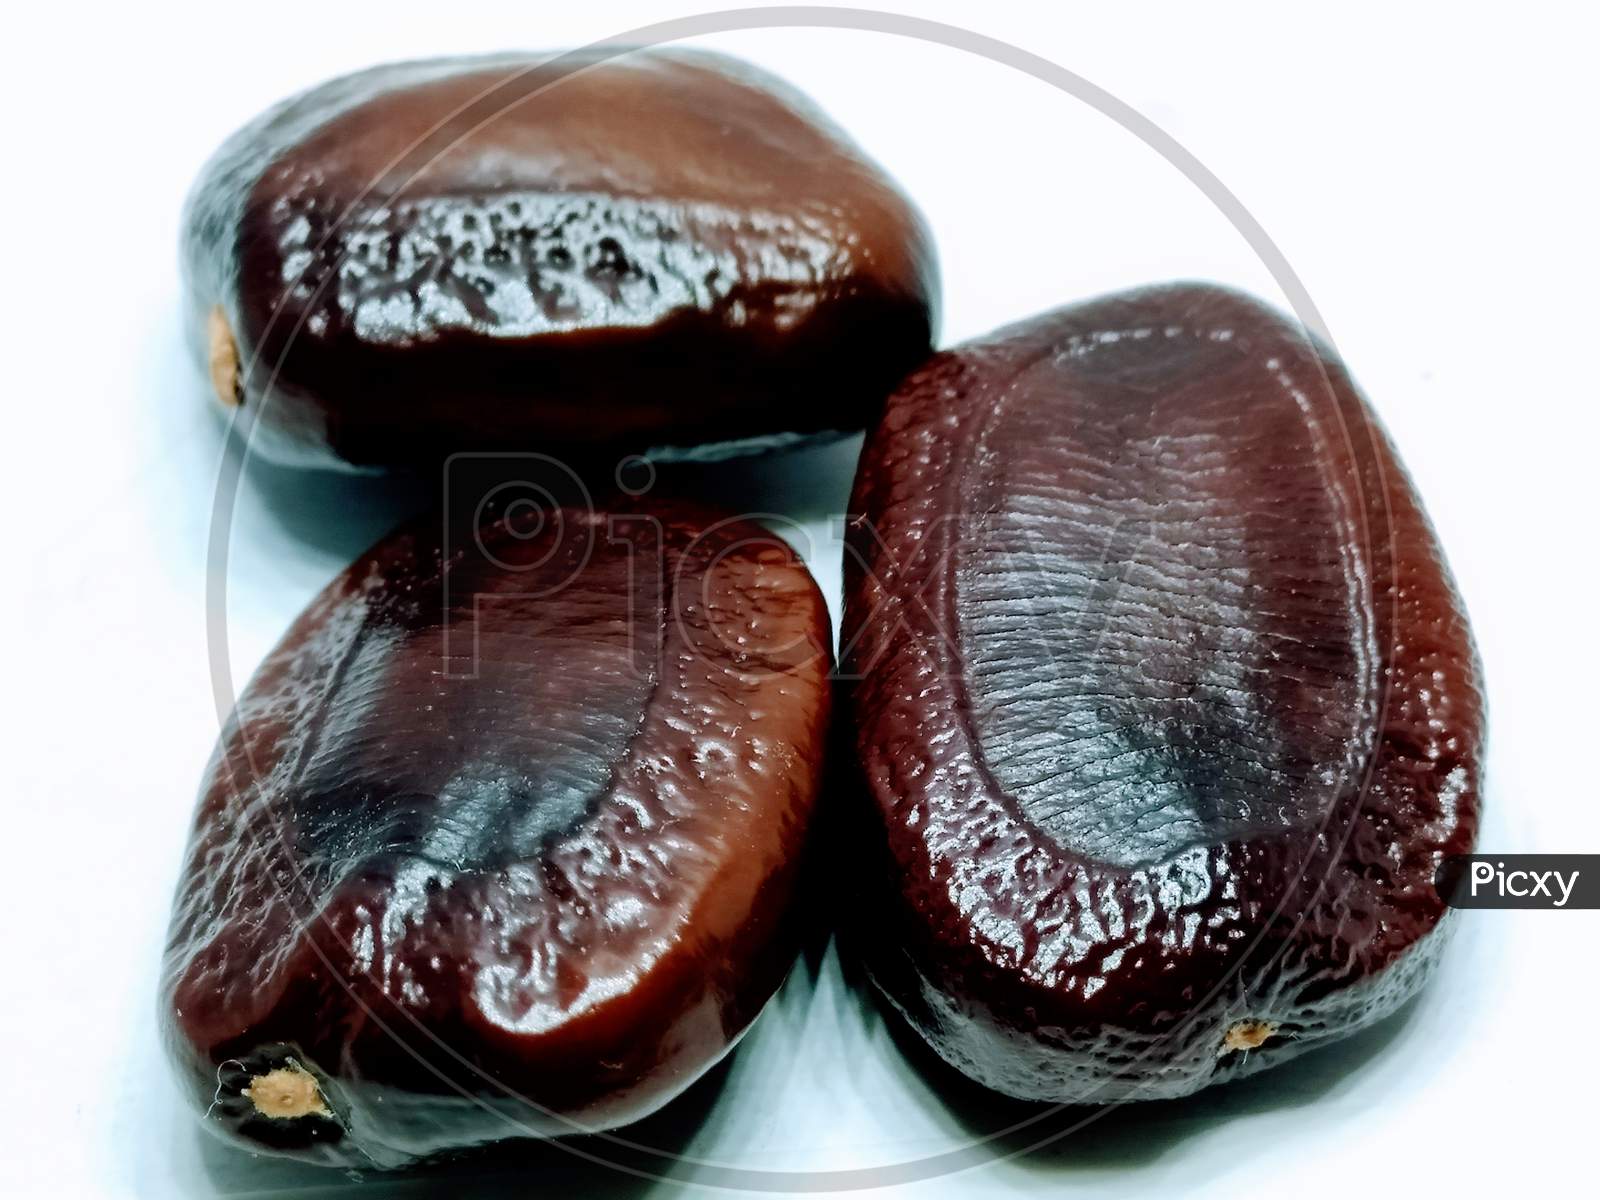 A picture of tamarind seeds